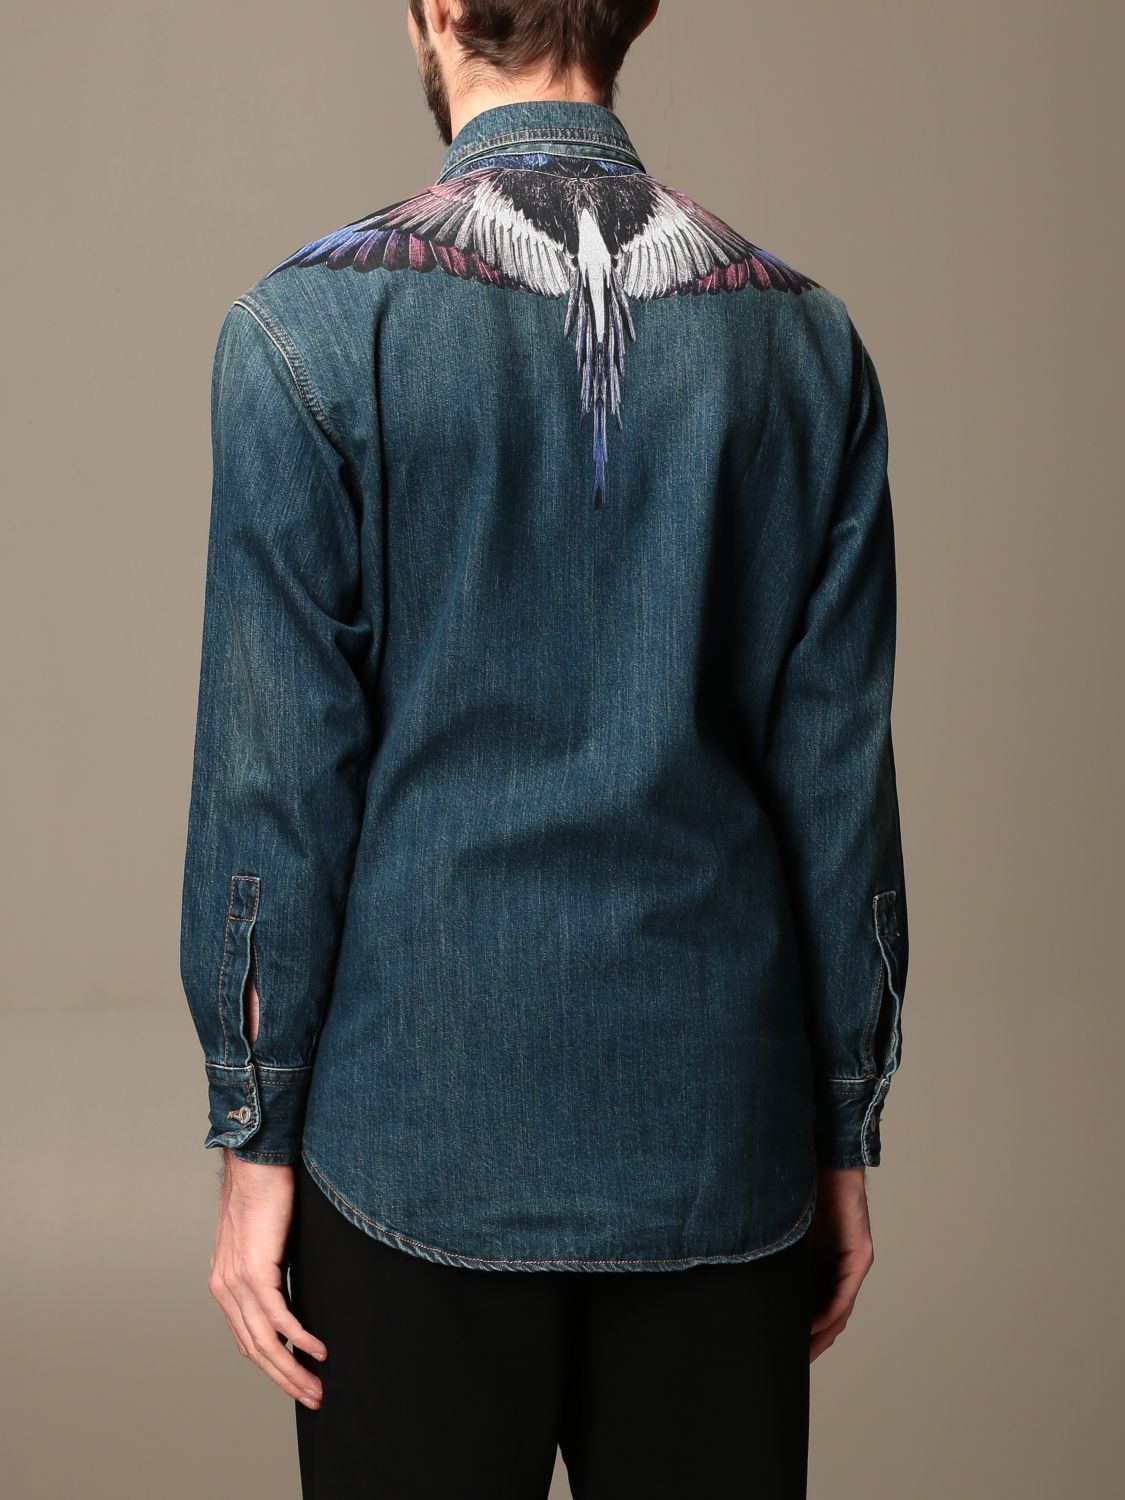 Marcelo Burlon Outlet: denim shirt with wings print - Blue Marcelo CMYD011F20DEN001 at GIGLIO.COM